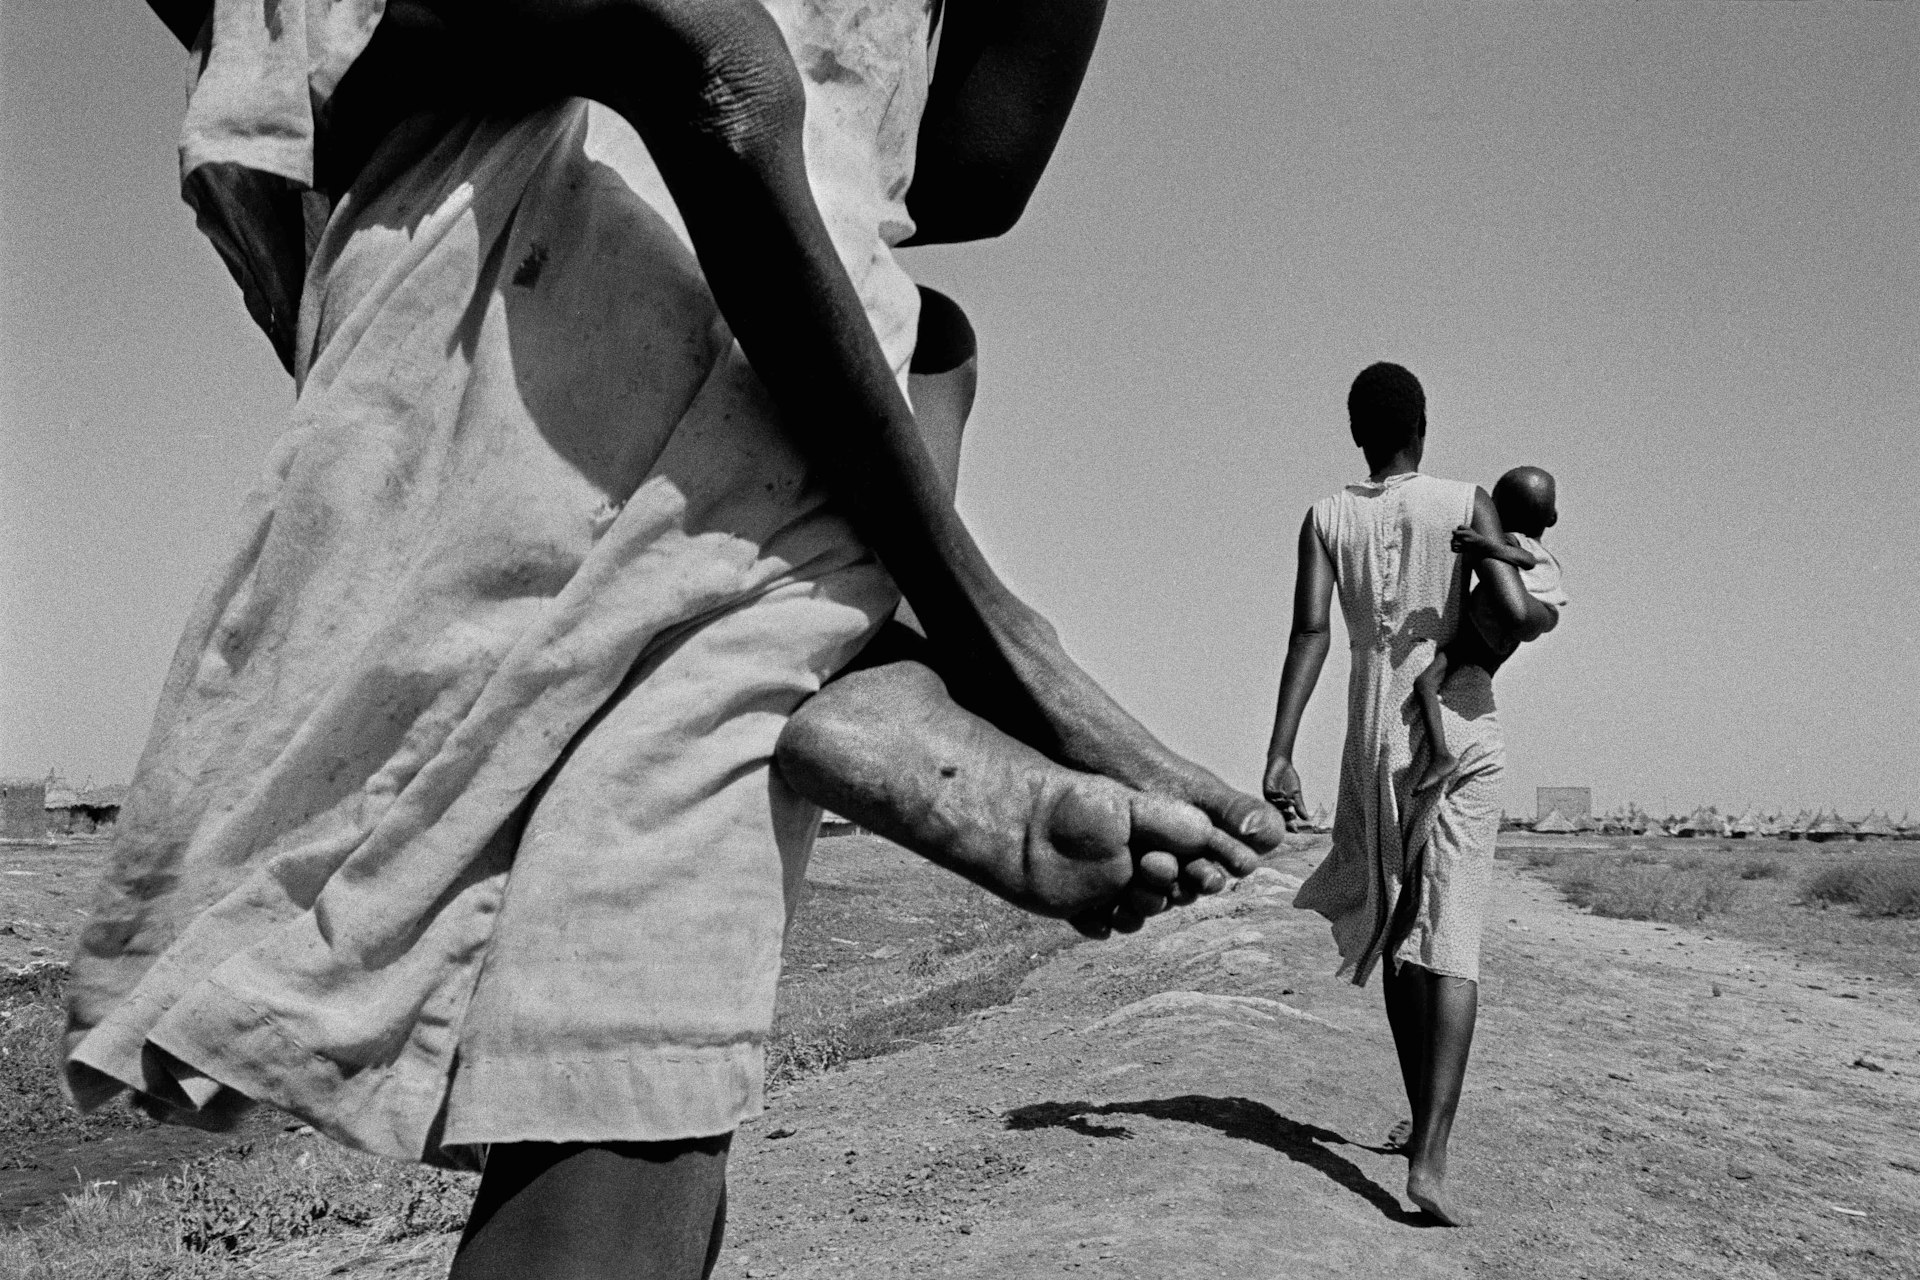 South Sudanese displaced. Most of the malnourished children are too weak to walk the 300m to the feeding centre and have to be carried there. Kosti. Sudan. 1988. © John Vink/Magnum Photos